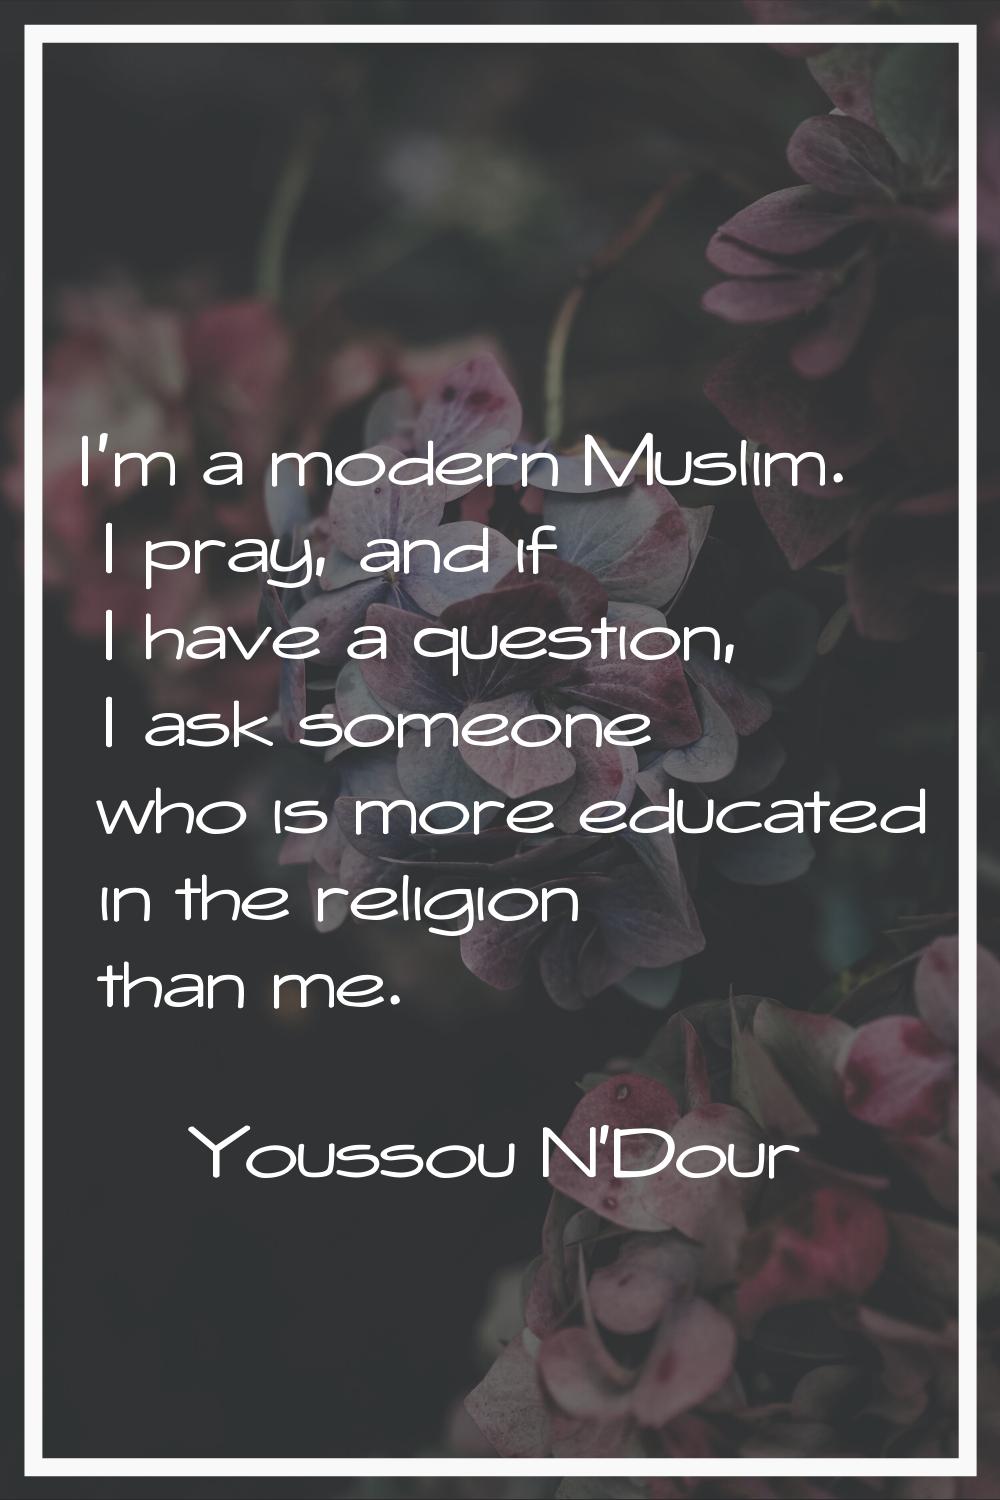 I'm a modern Muslim. I pray, and if I have a question, I ask someone who is more educated in the re